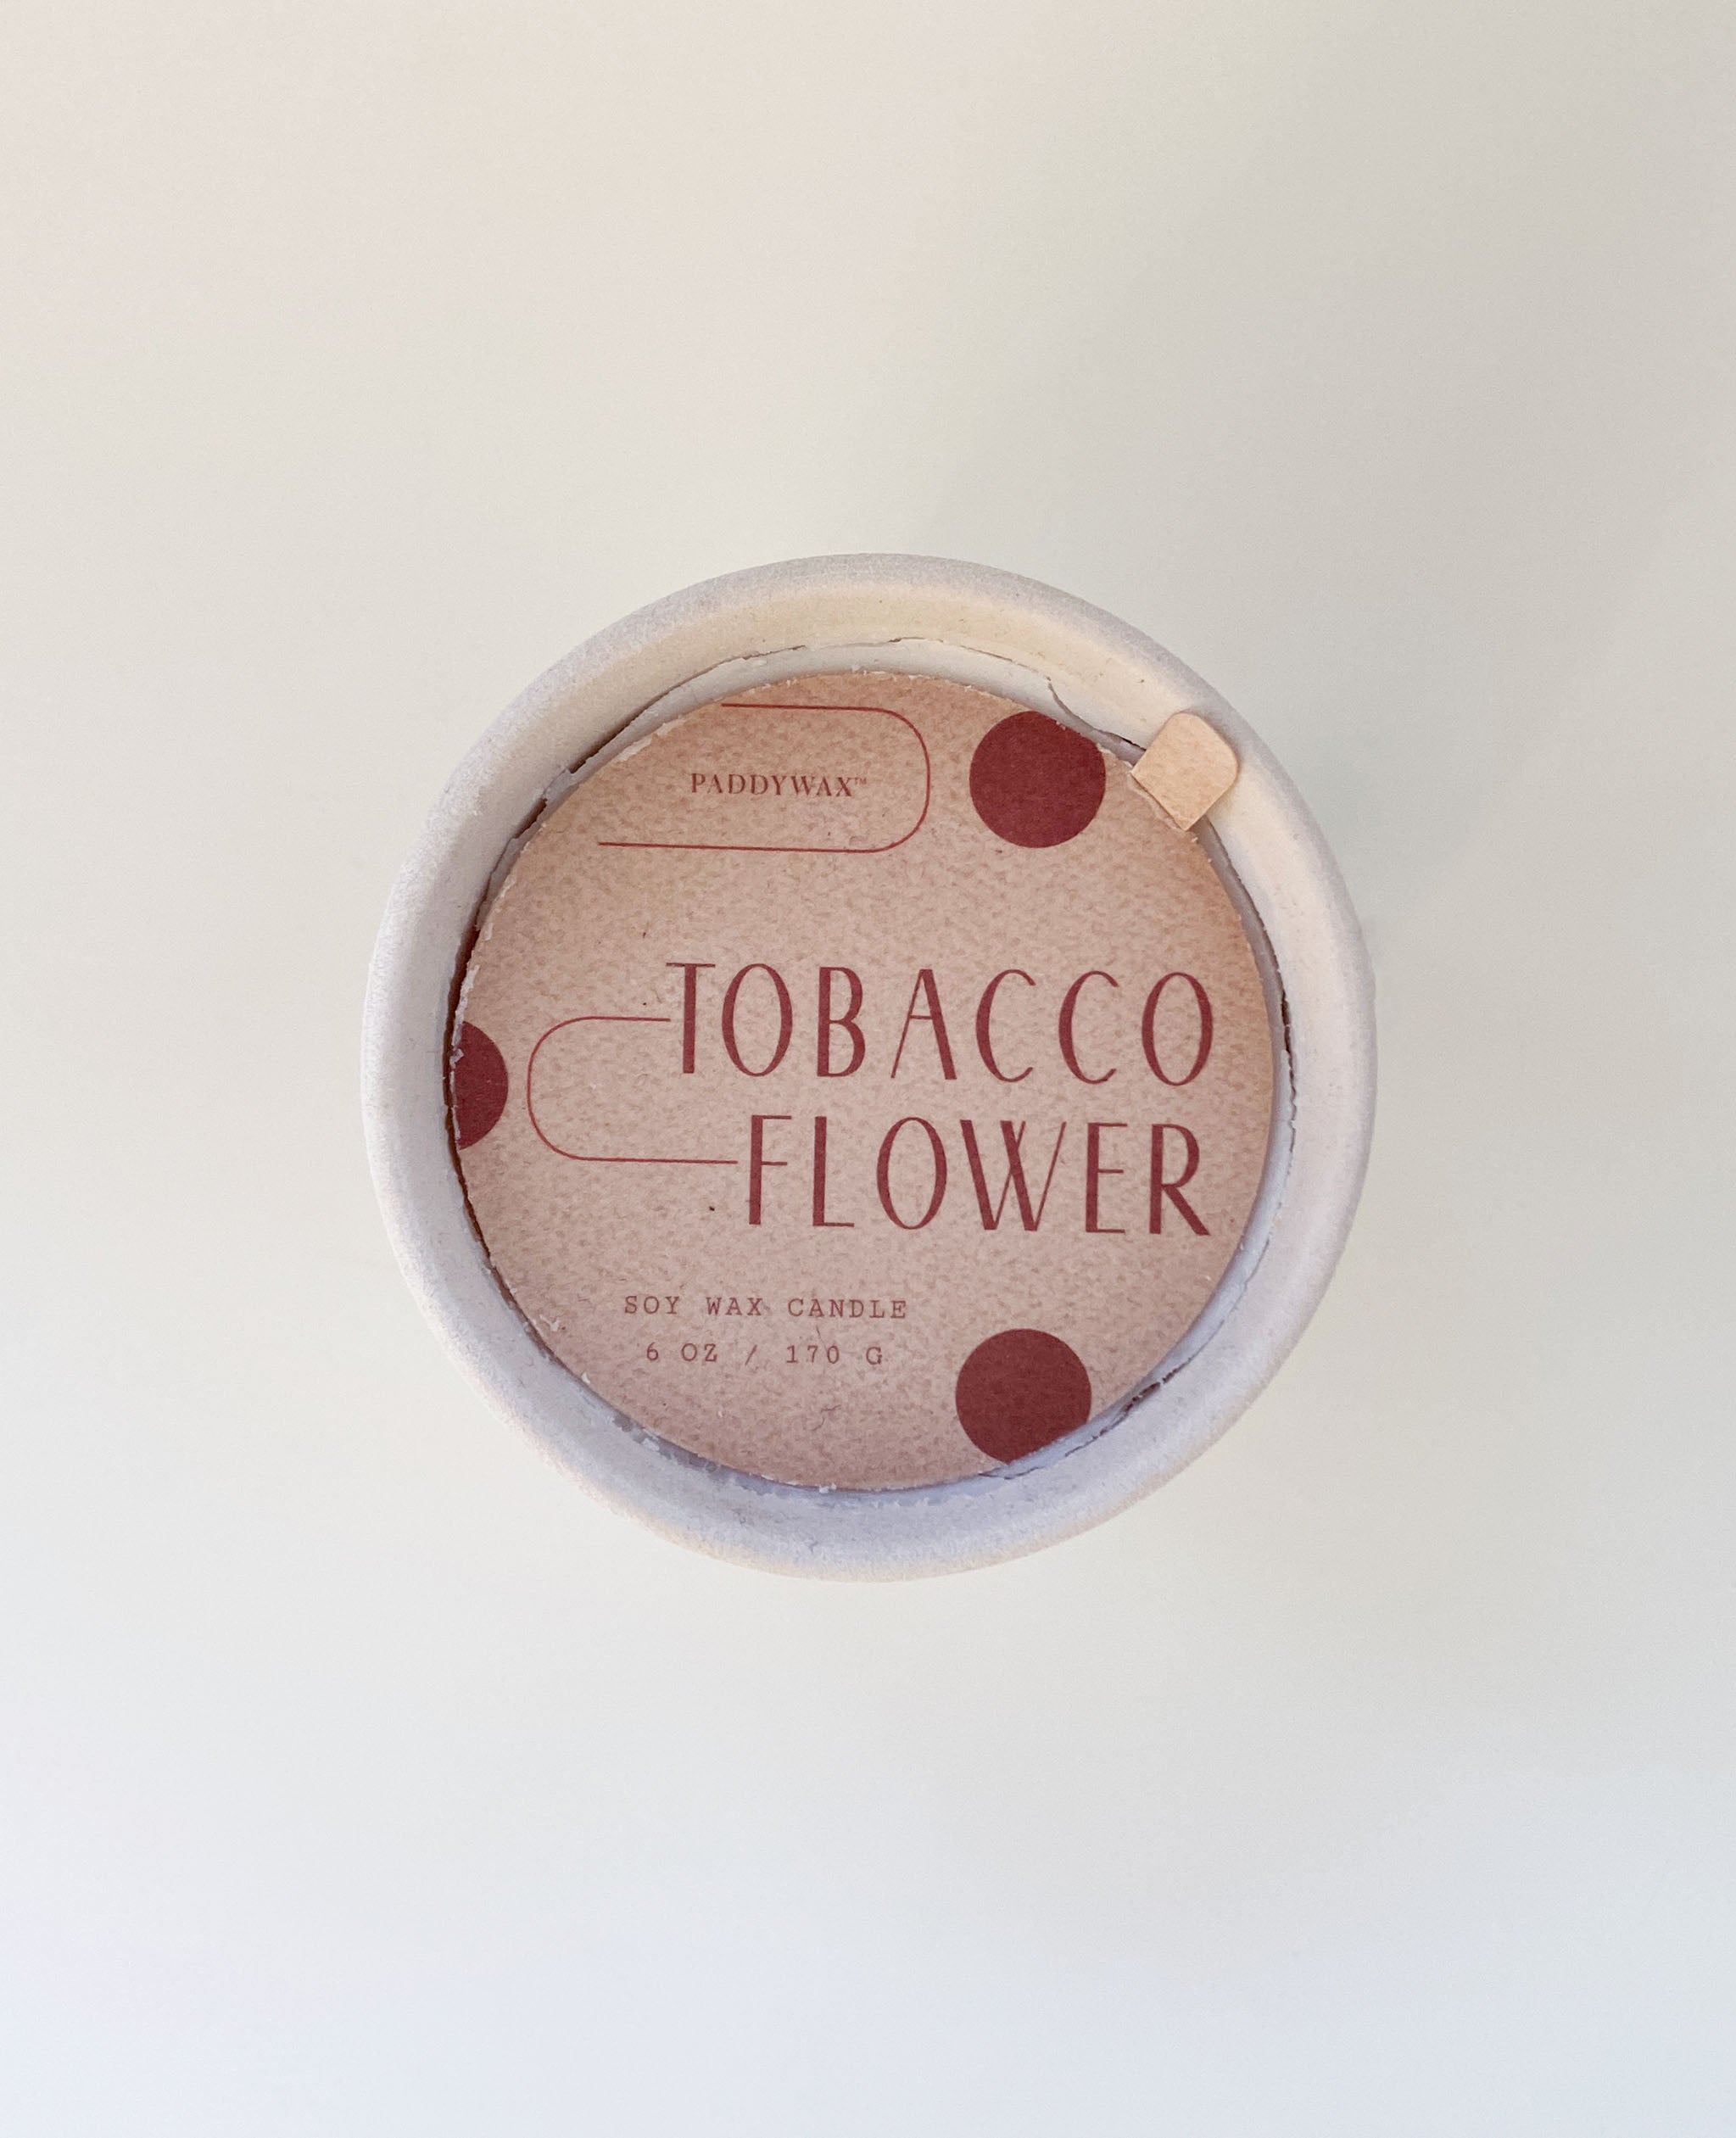 Hourglass Candle - Tobacco Flower